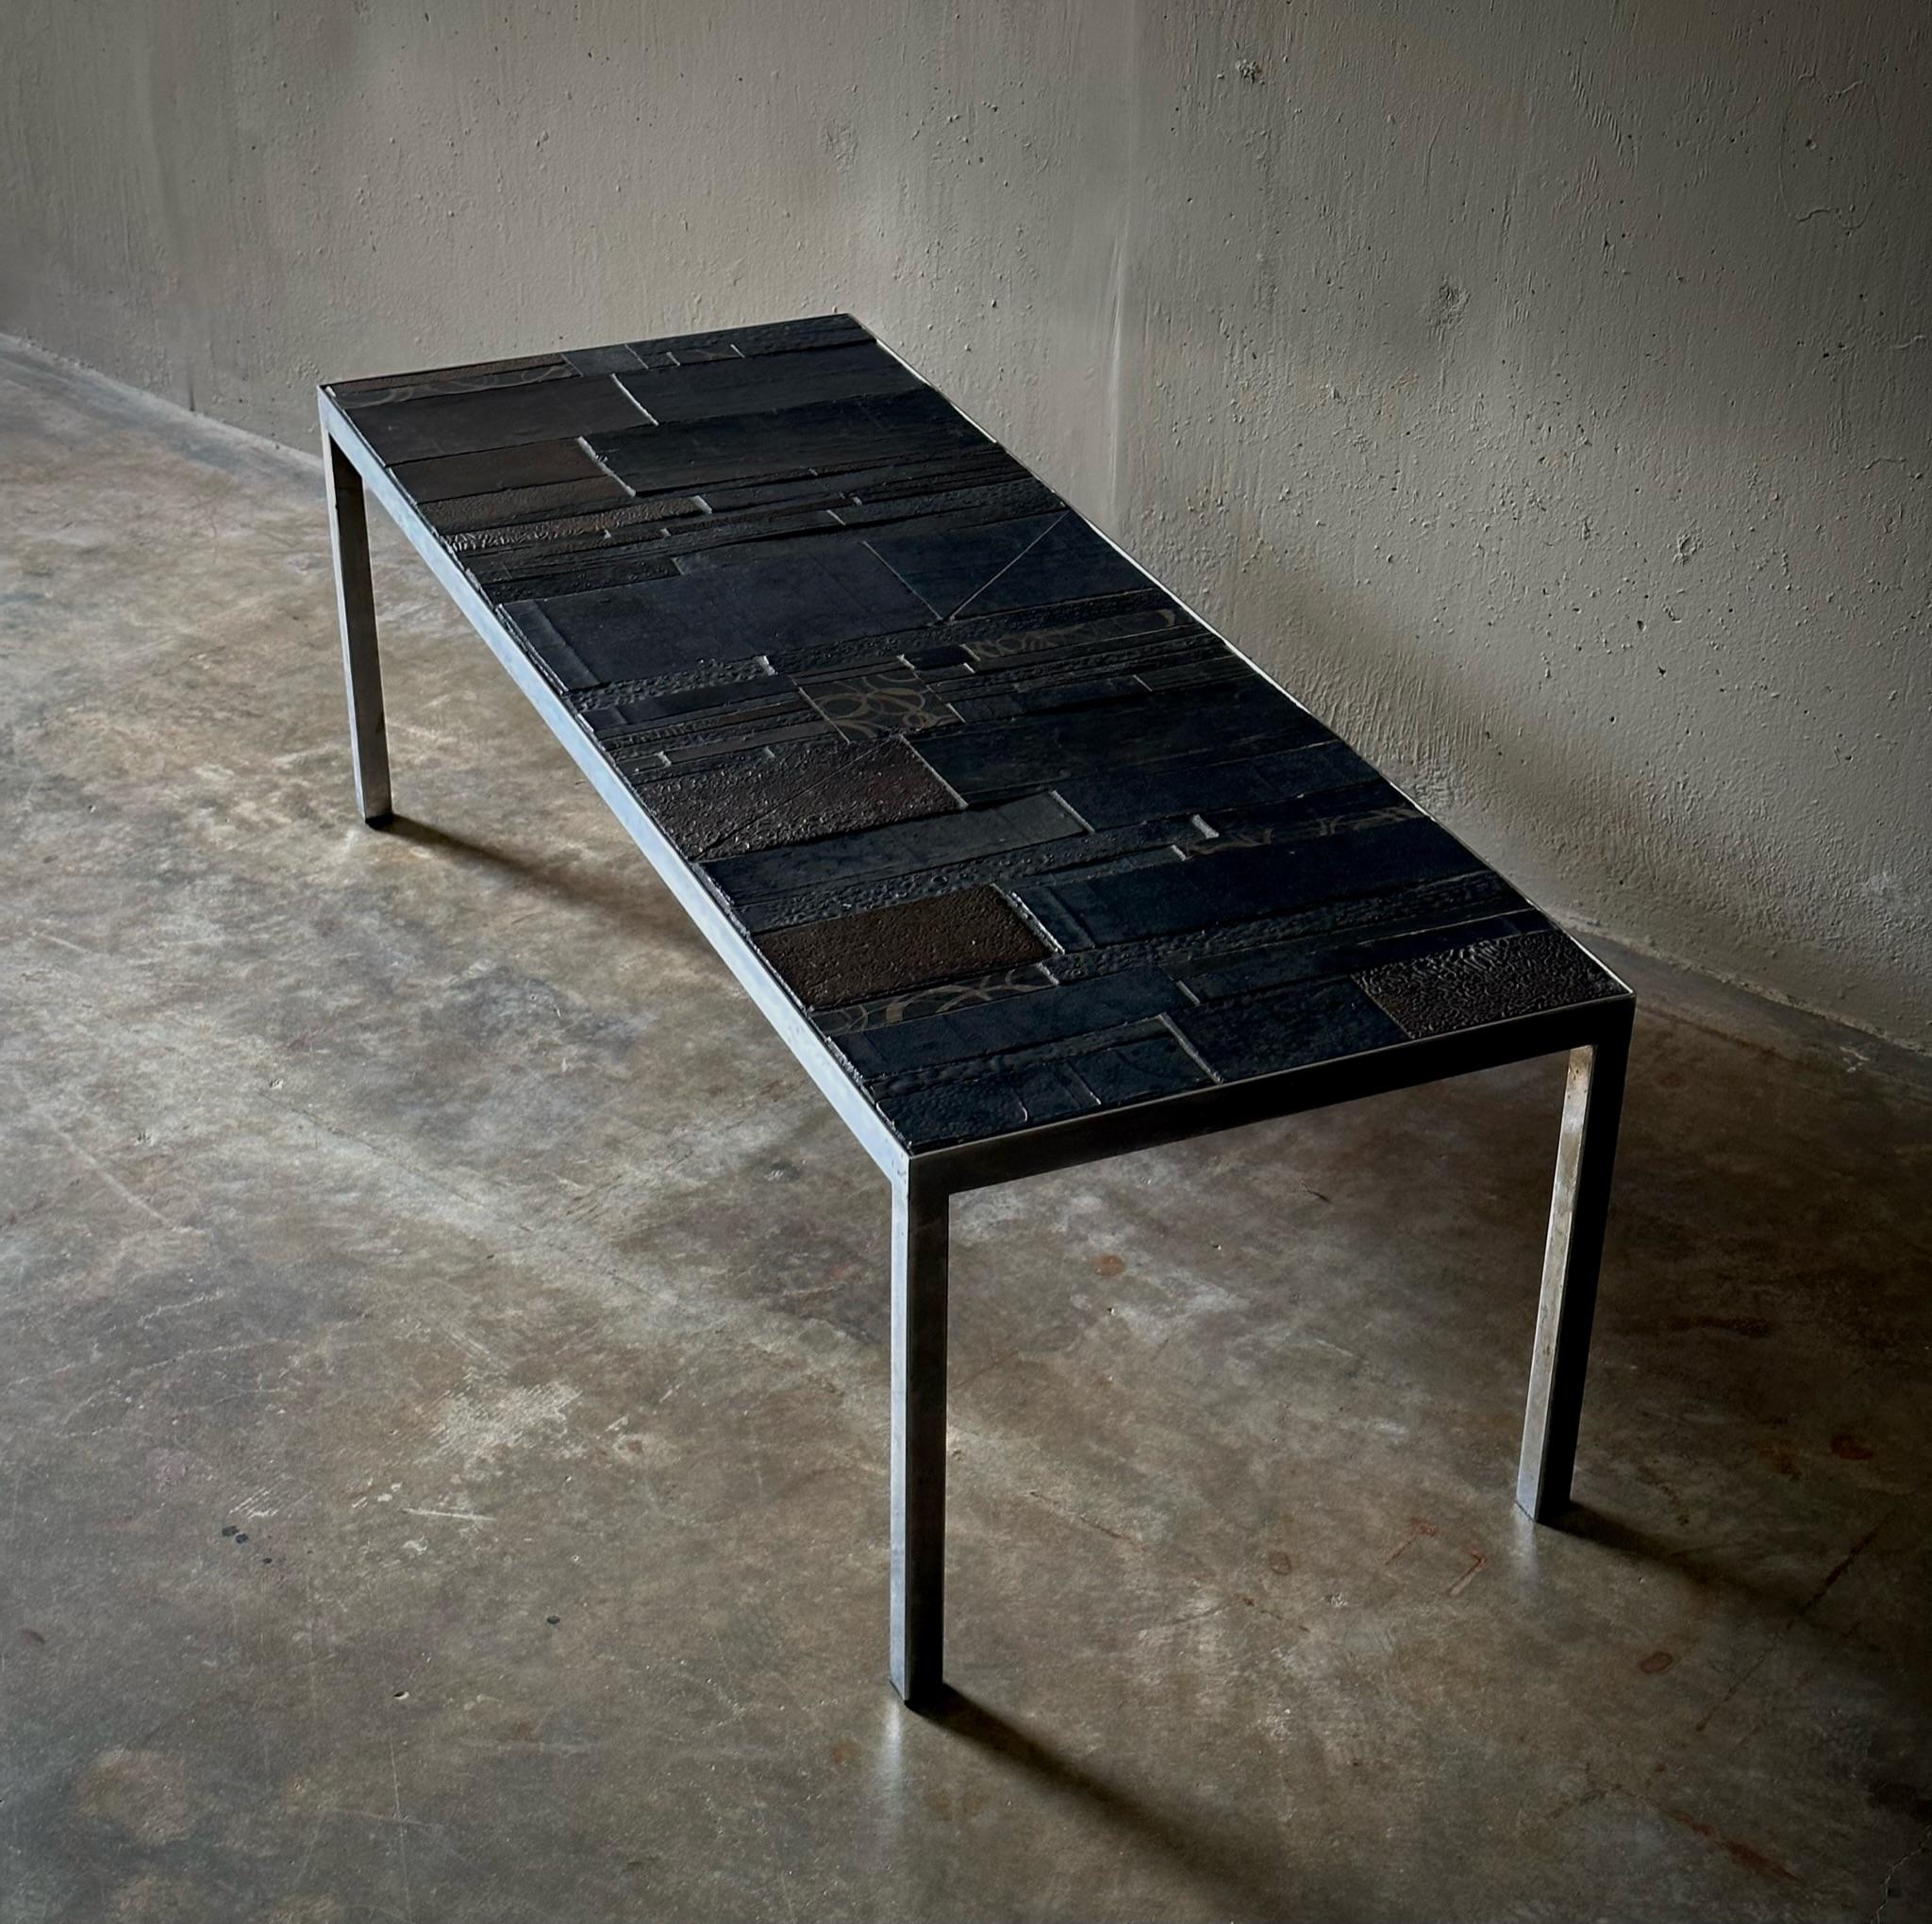 Low rectangular coffee table with ceramic tile top designed by Belgian designer Rogier Vandeweghe and produced by Amphora in 1960s Brugges. The tabletop has a wonderfully earthy, mineral feel with an abstract graphic design.

Belgium, circa